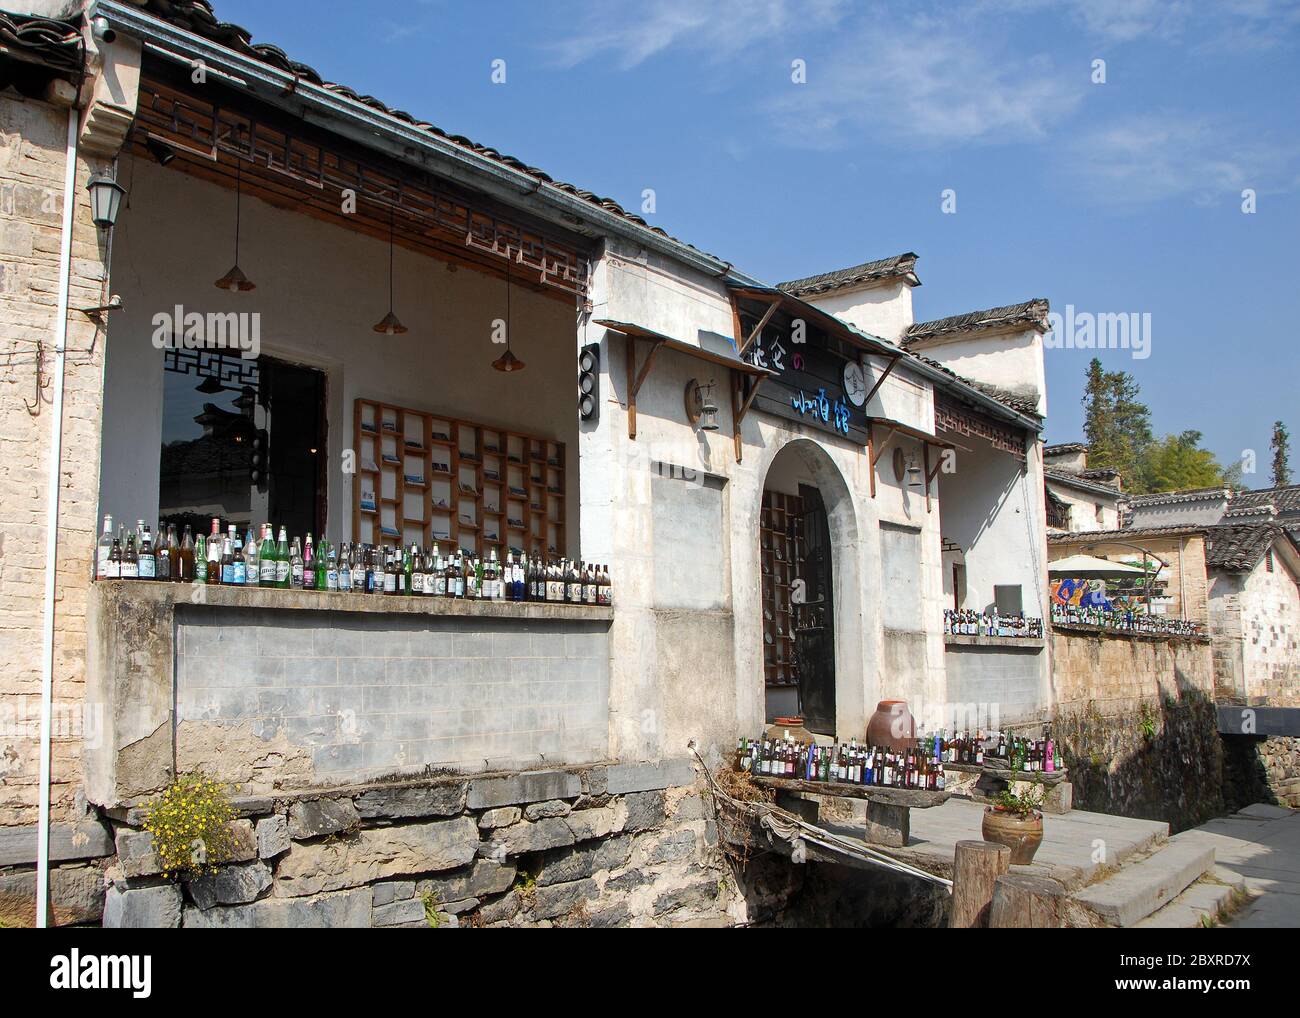 Xidi Ancient Town, Anhui Province / China - Nov 4 2019: A bar with bottles in a quiet street in the old town of Xidi called the Back Rivulet Stock Photo